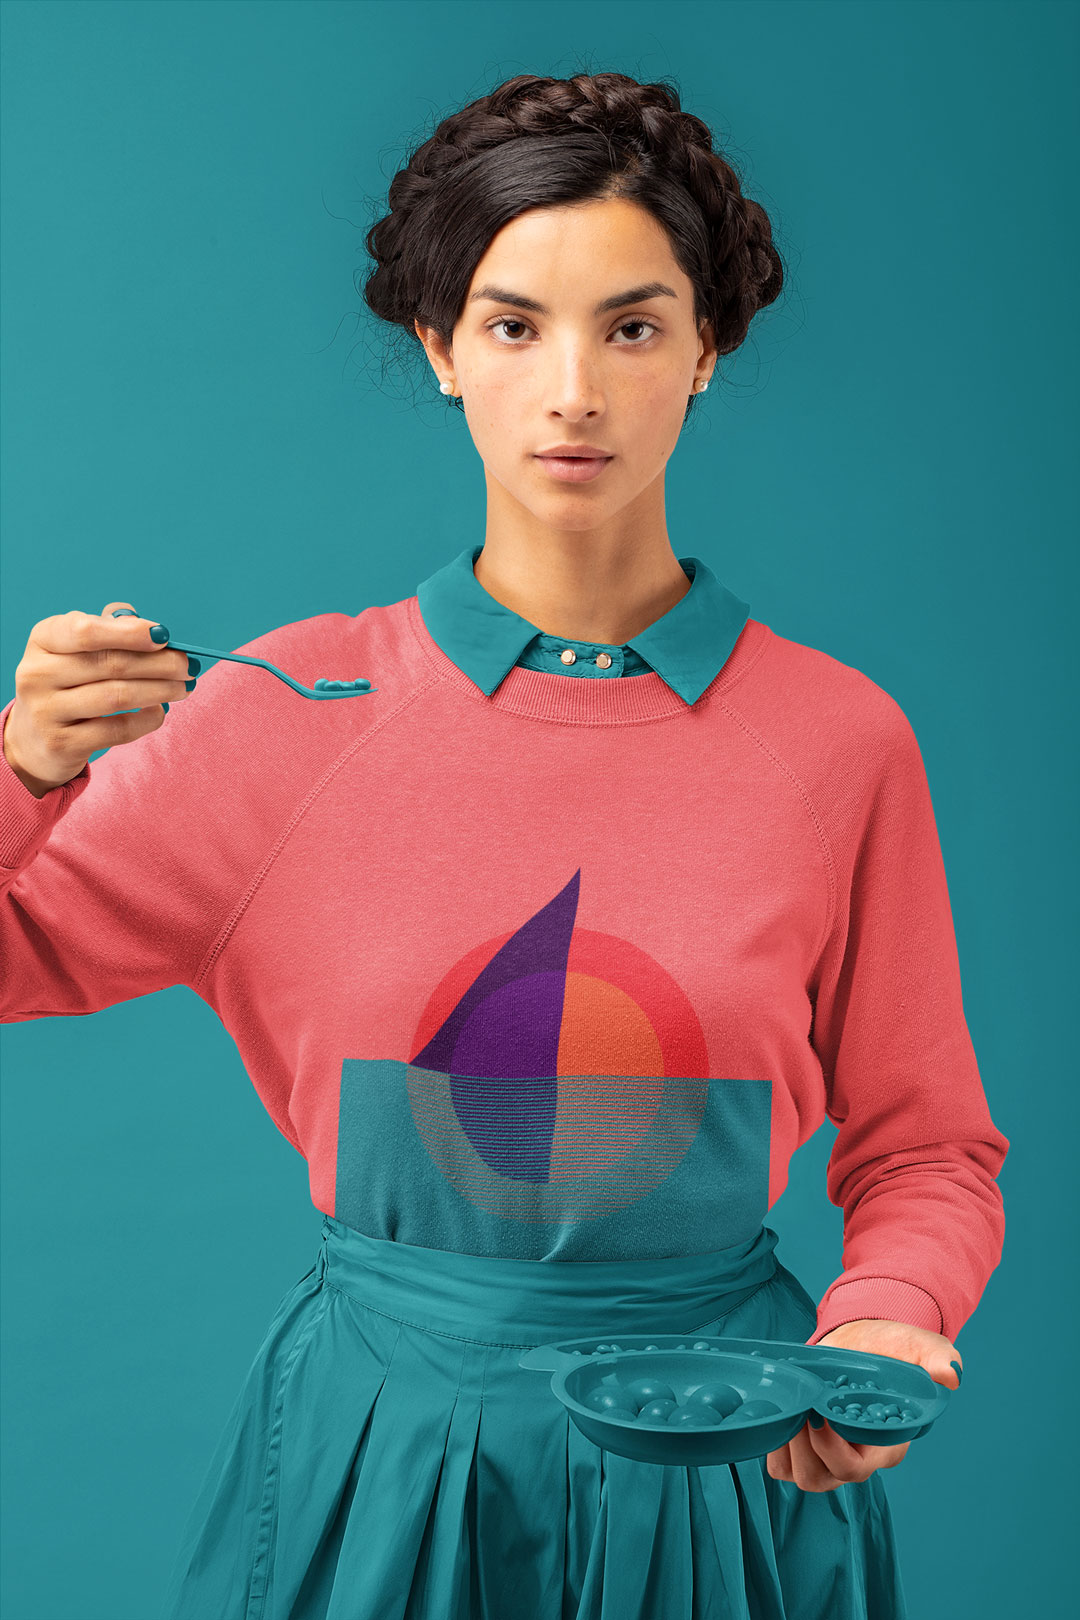 artistic-mockup-featuring-a-woman-with-a-sweatshirt-at-a-studio-32787